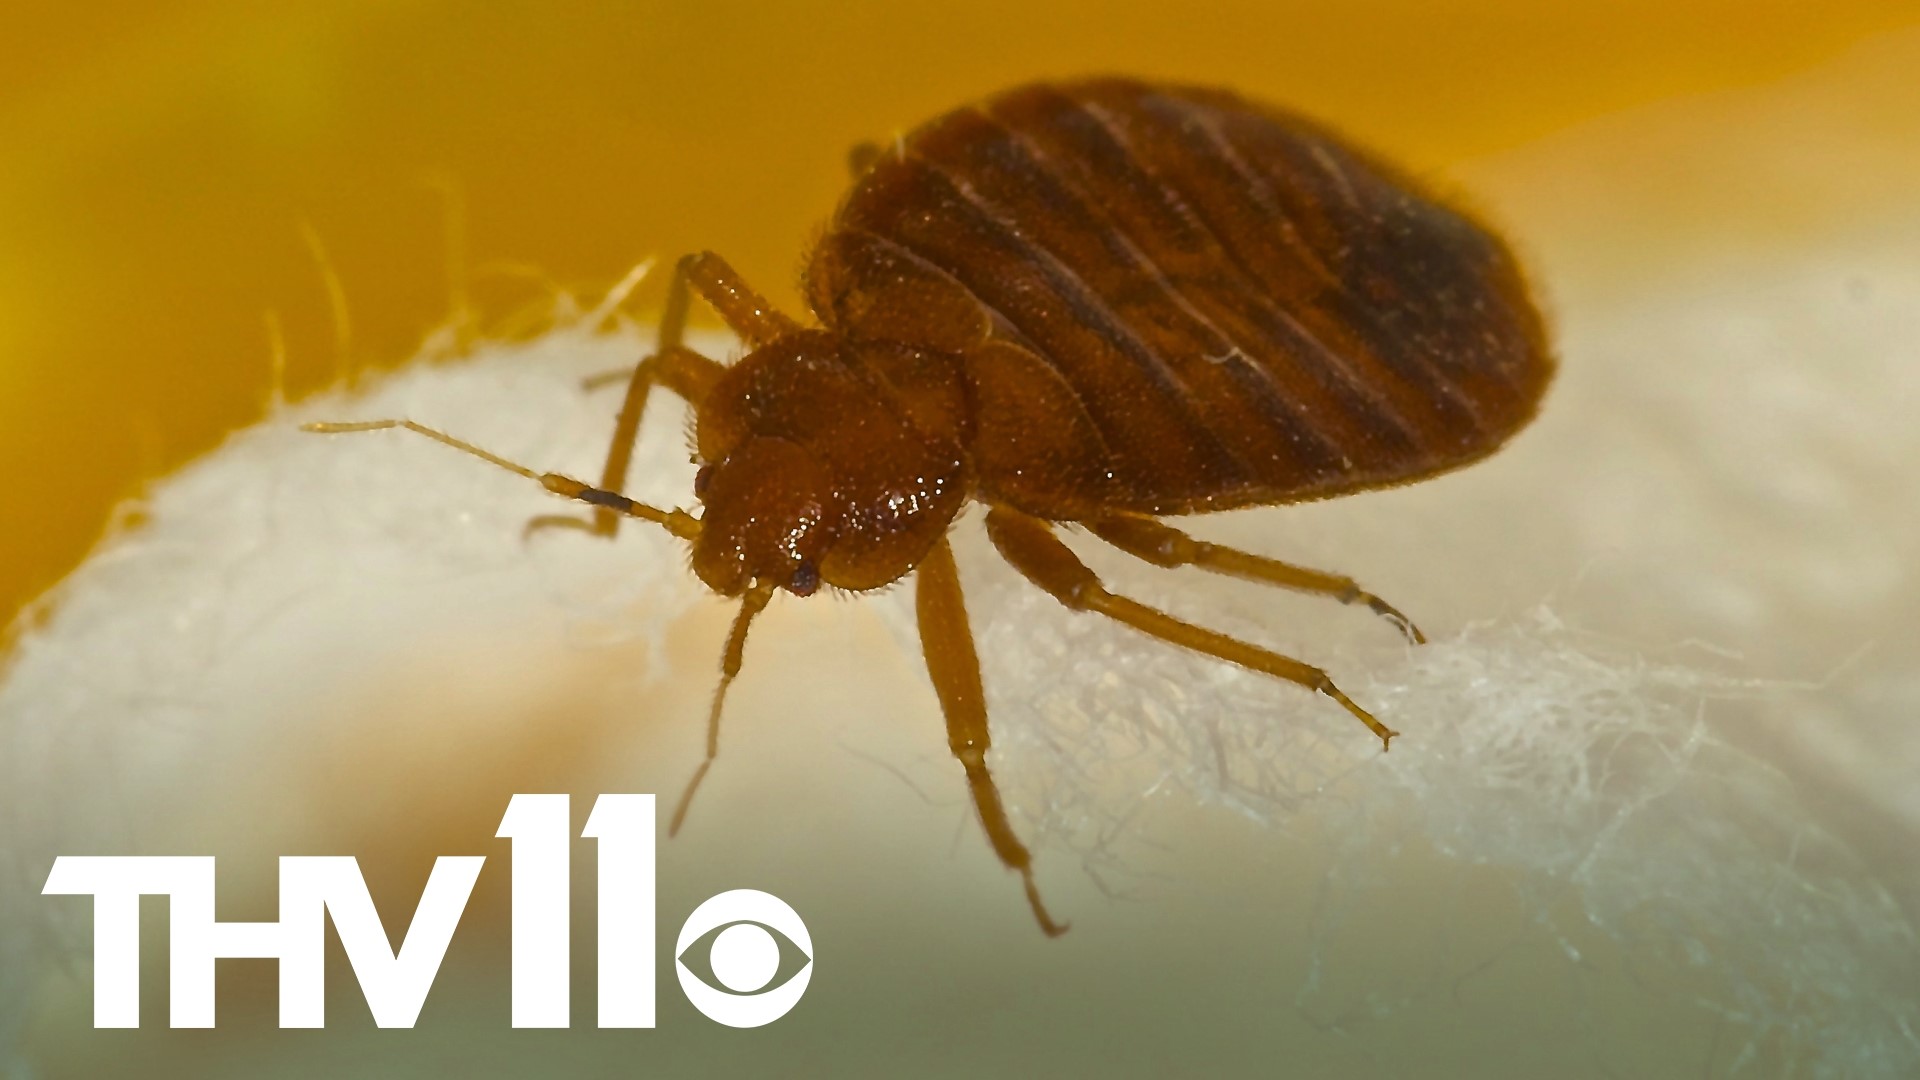 The entire city of Paris, France has been dealing with a bed bug outbreak after the city's fashion week, and as they prepare for the summer Olympics.